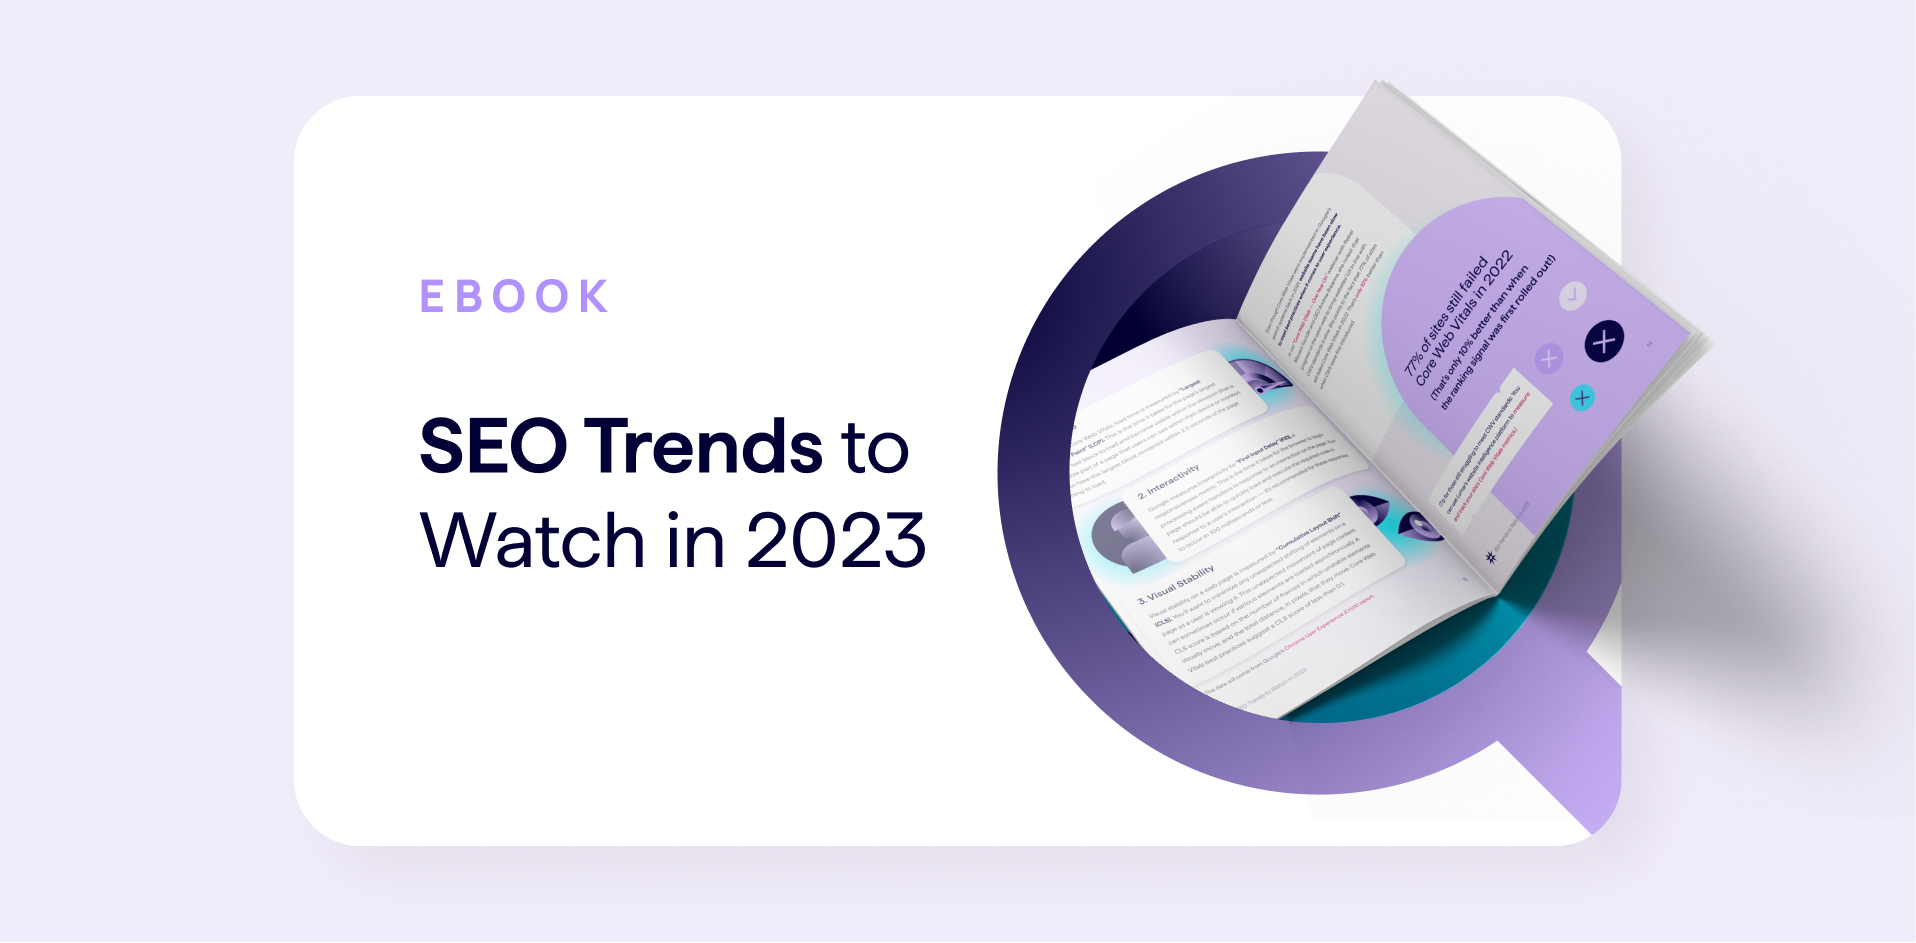 eBook - 2023 SEO Trends to Watch - Website Strategy Guide